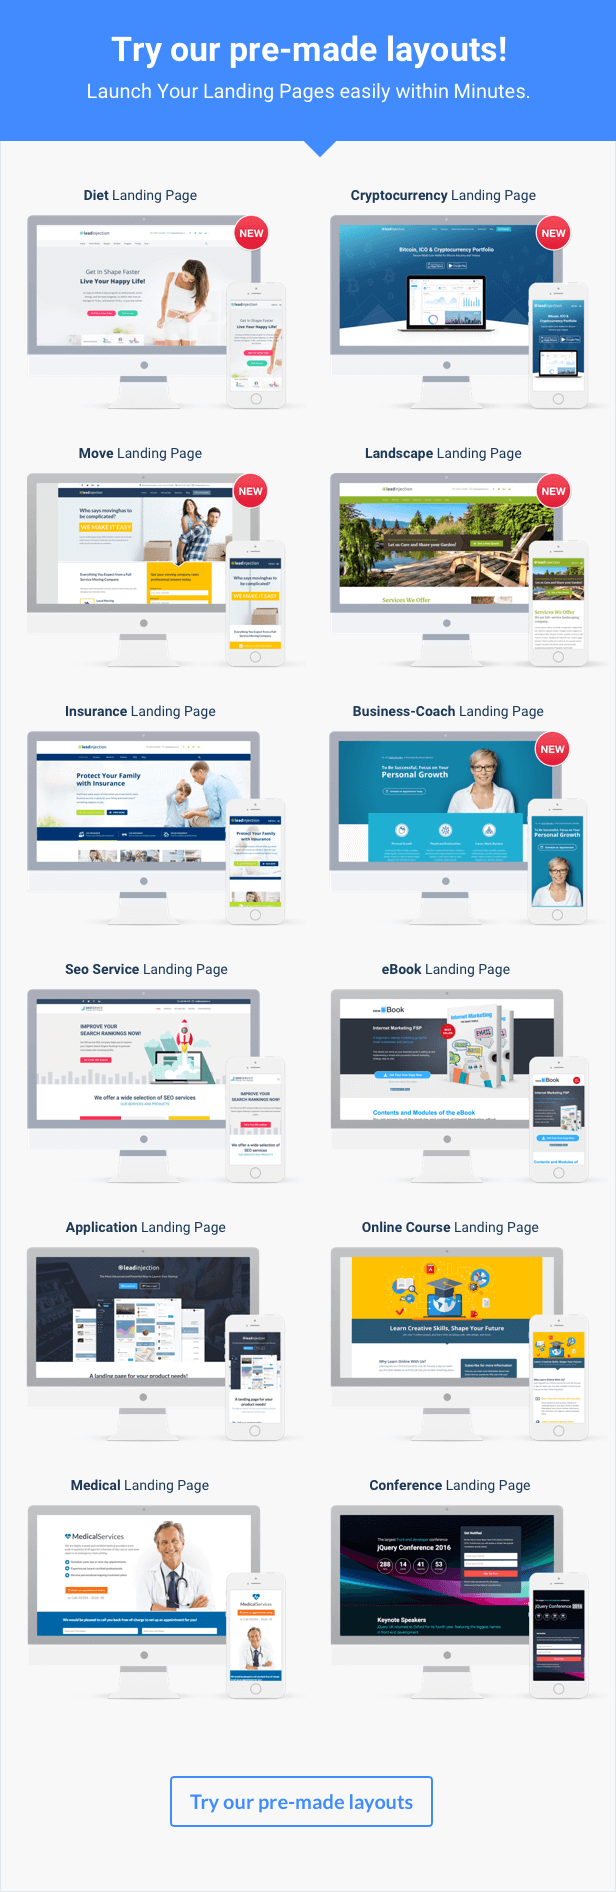 Pre made Layouts: Insurance, Seo Agency, eBook, Online Course, Application, Conference, Medical Service